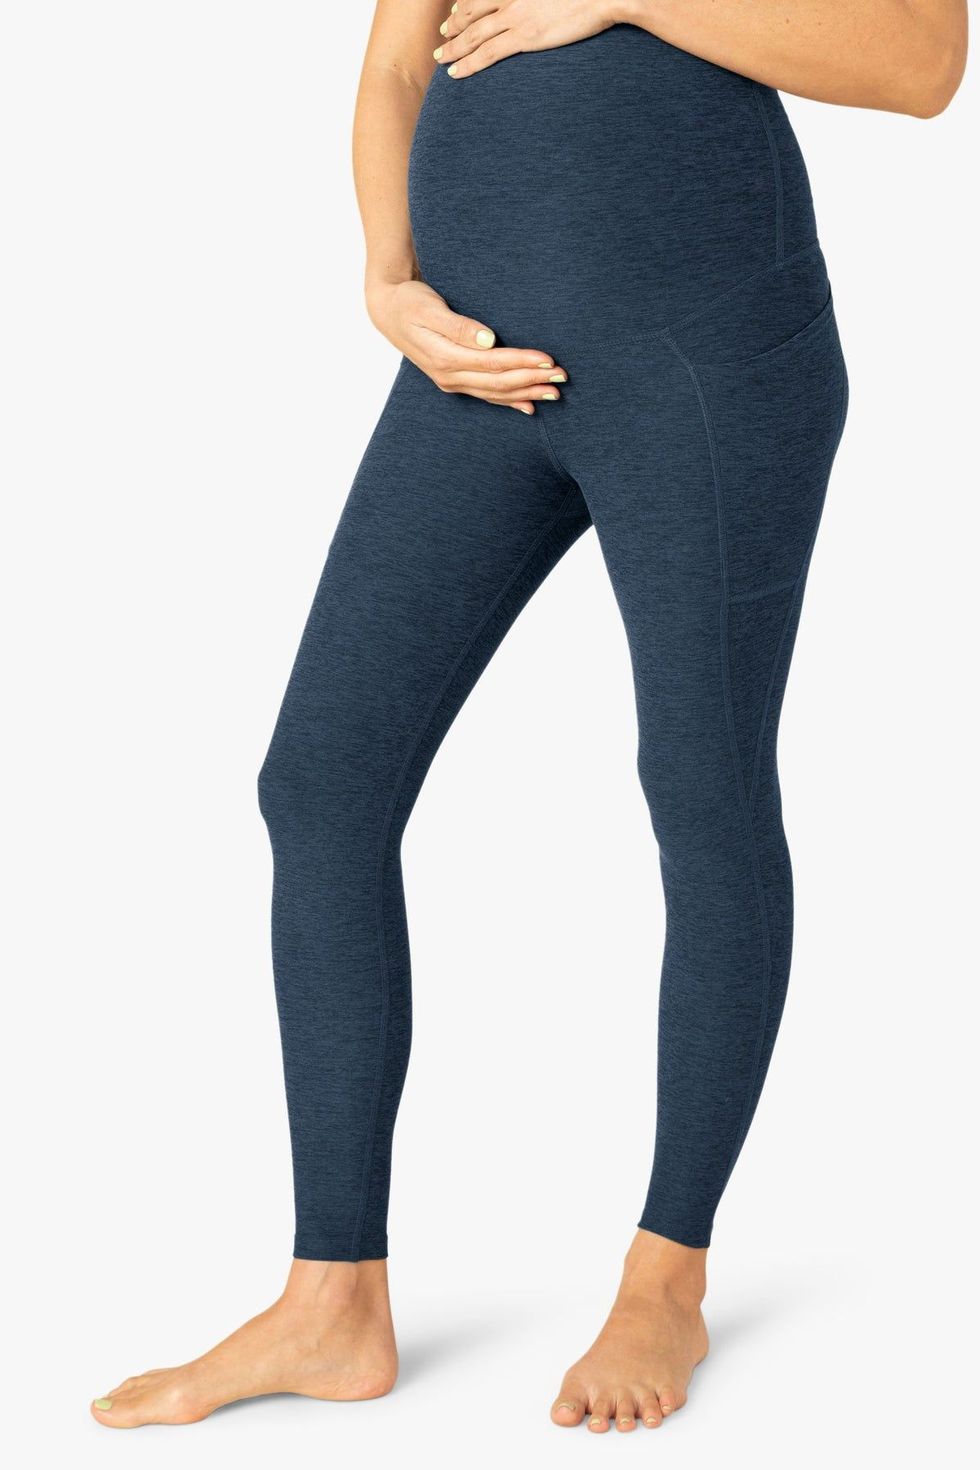 These Are The BEST Maternity Leggings Every Mama-To-Be Should Own - SHEfinds